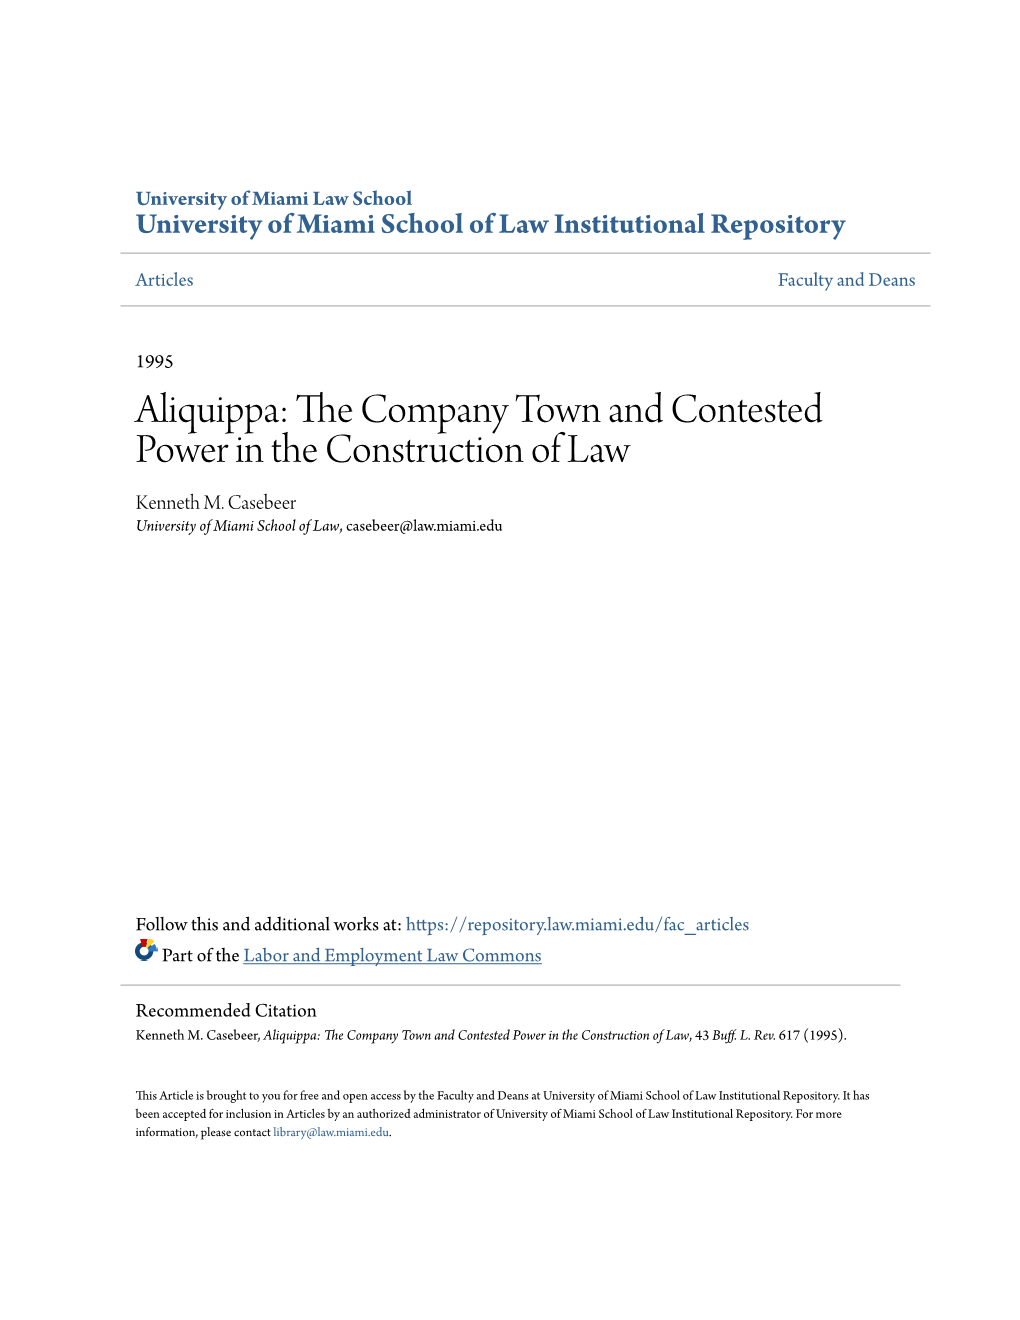 Aliquippa: the Ompc Any Town and Contested Power in the Construction of Law Kenneth M